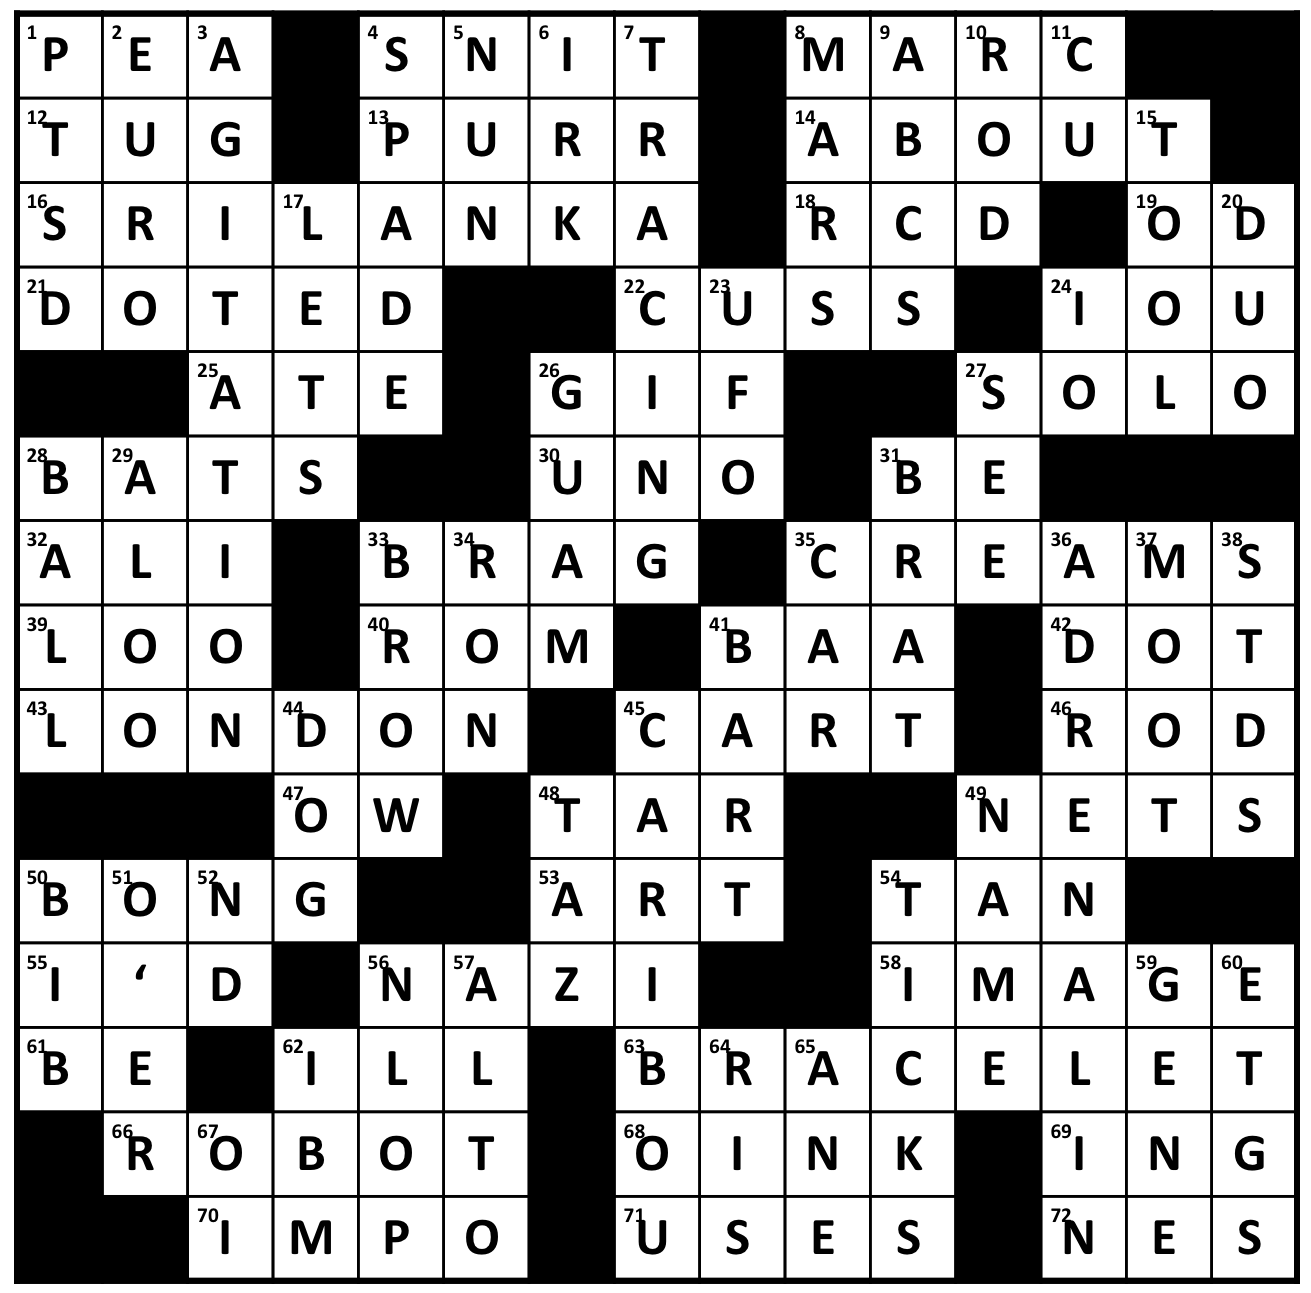 Crossword Puzzle Answers Issue 6 The Pioneer